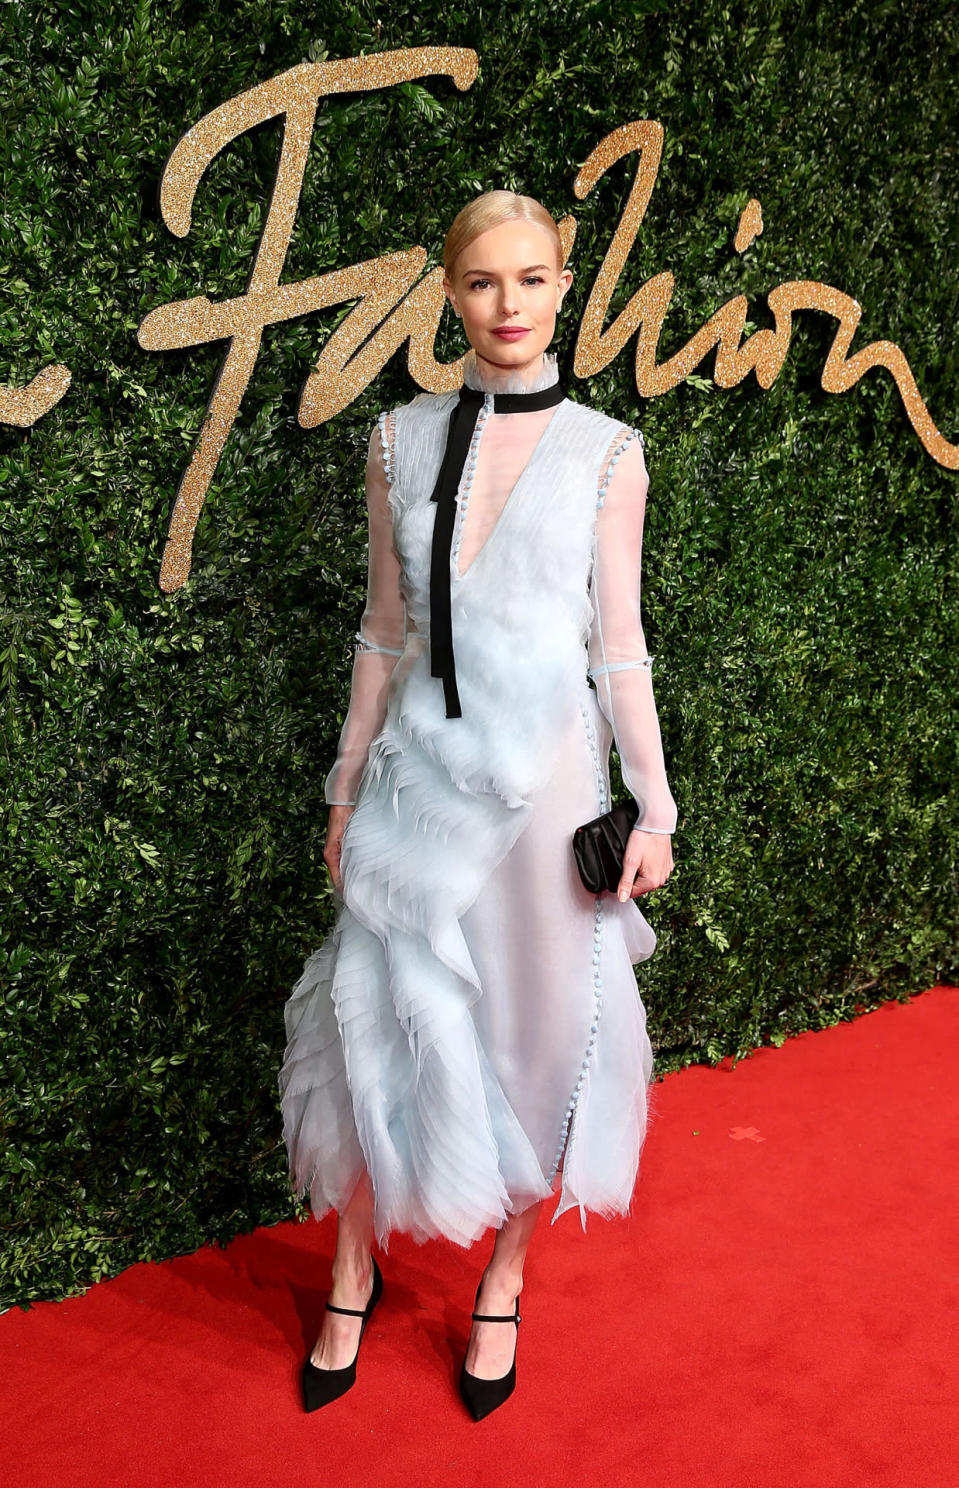 Kate Bosworth in a light blue frock with high neck and ribbon detail by Erdem.